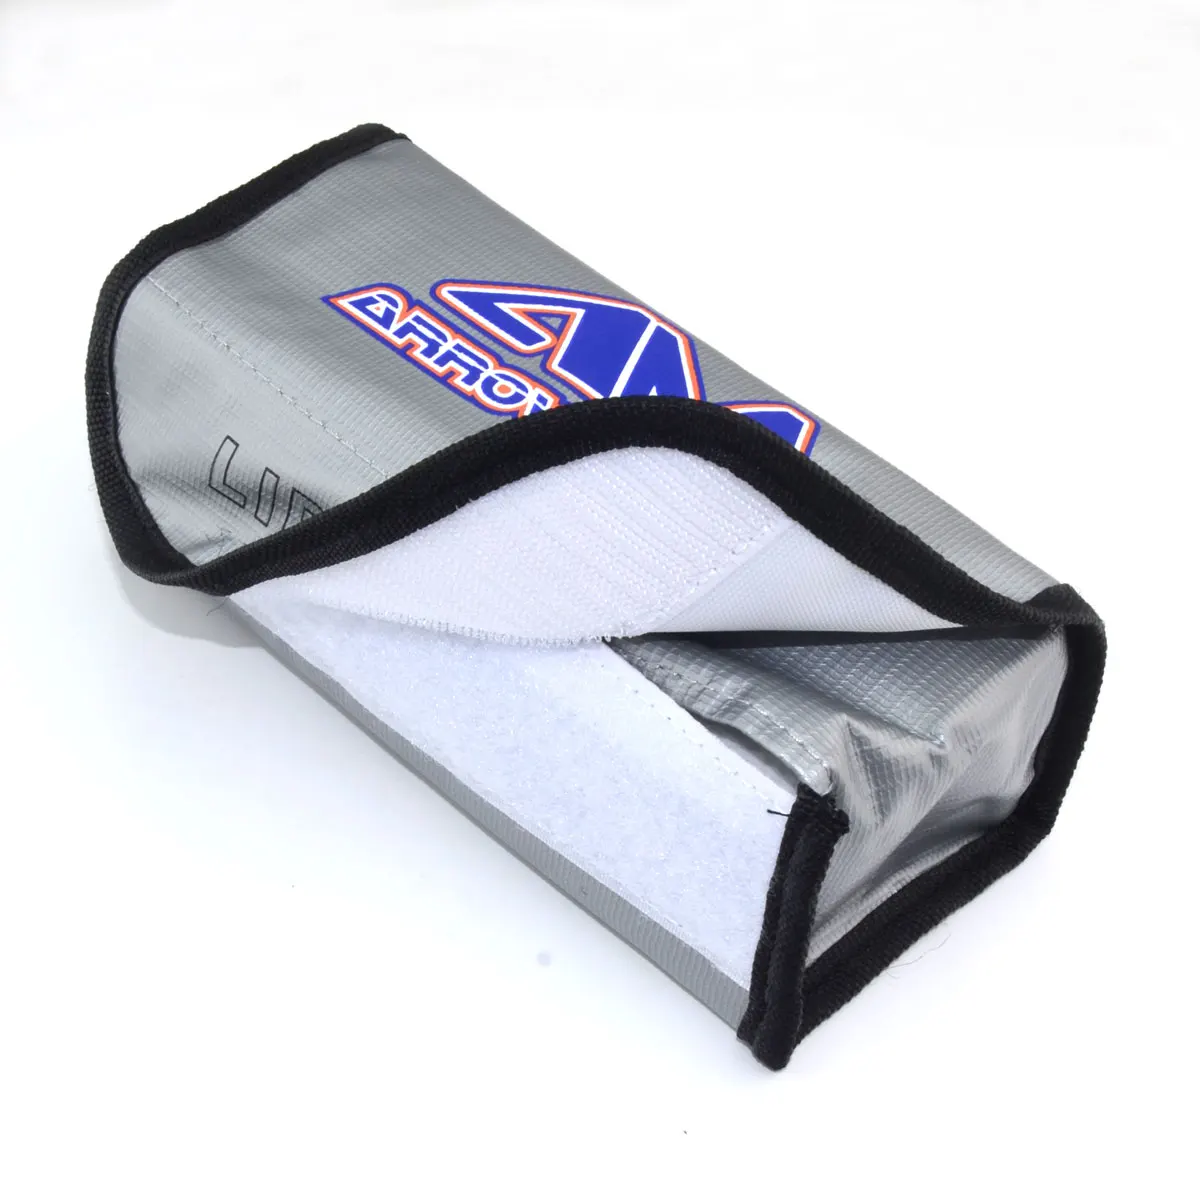 

Arrowmax RC Square LiPo Safe Bag Battery Safety Li-Po Protect Bag Pouch Safe Guard Charge Sack 185 X 75 X 60 mm AM-199502